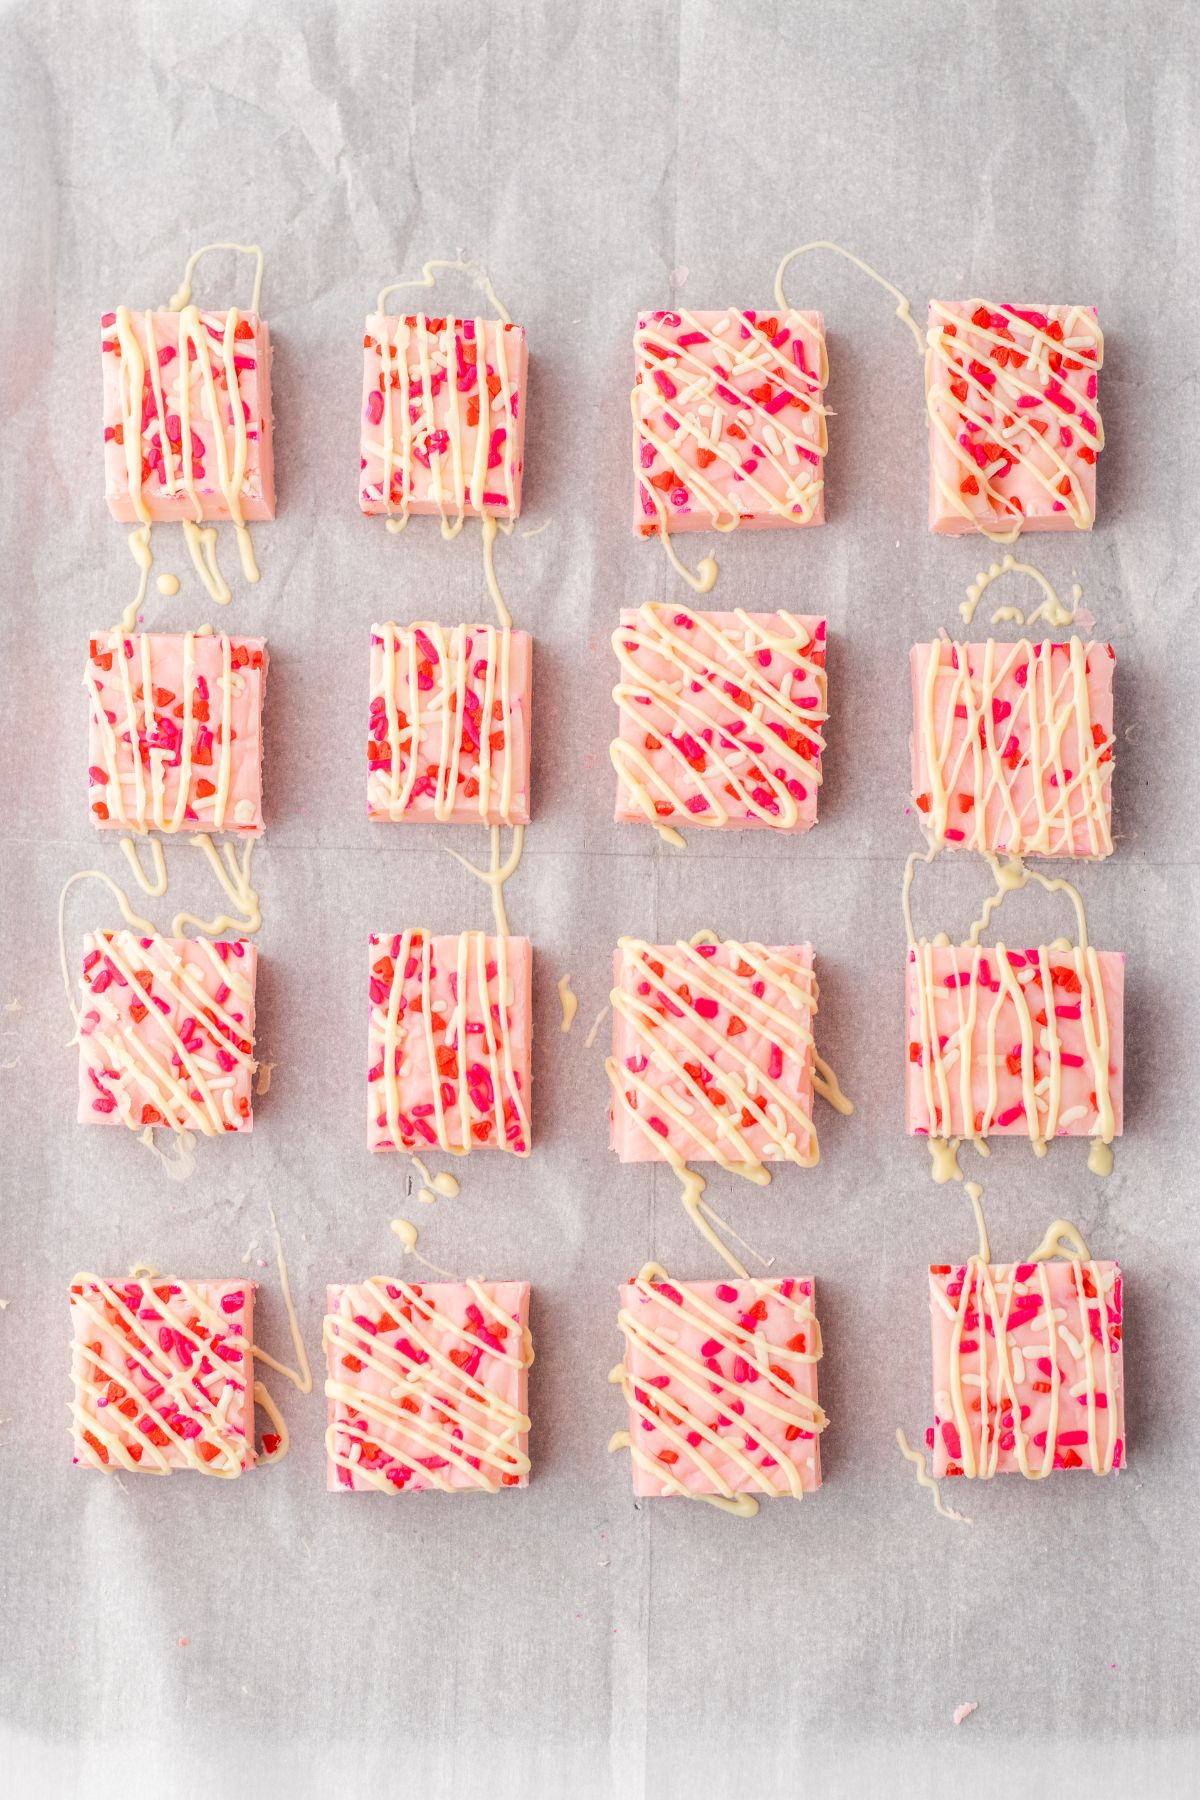 pieces of pink fudge cut into squares on a parchment lined baking sheet being drizzled with white chocolate.